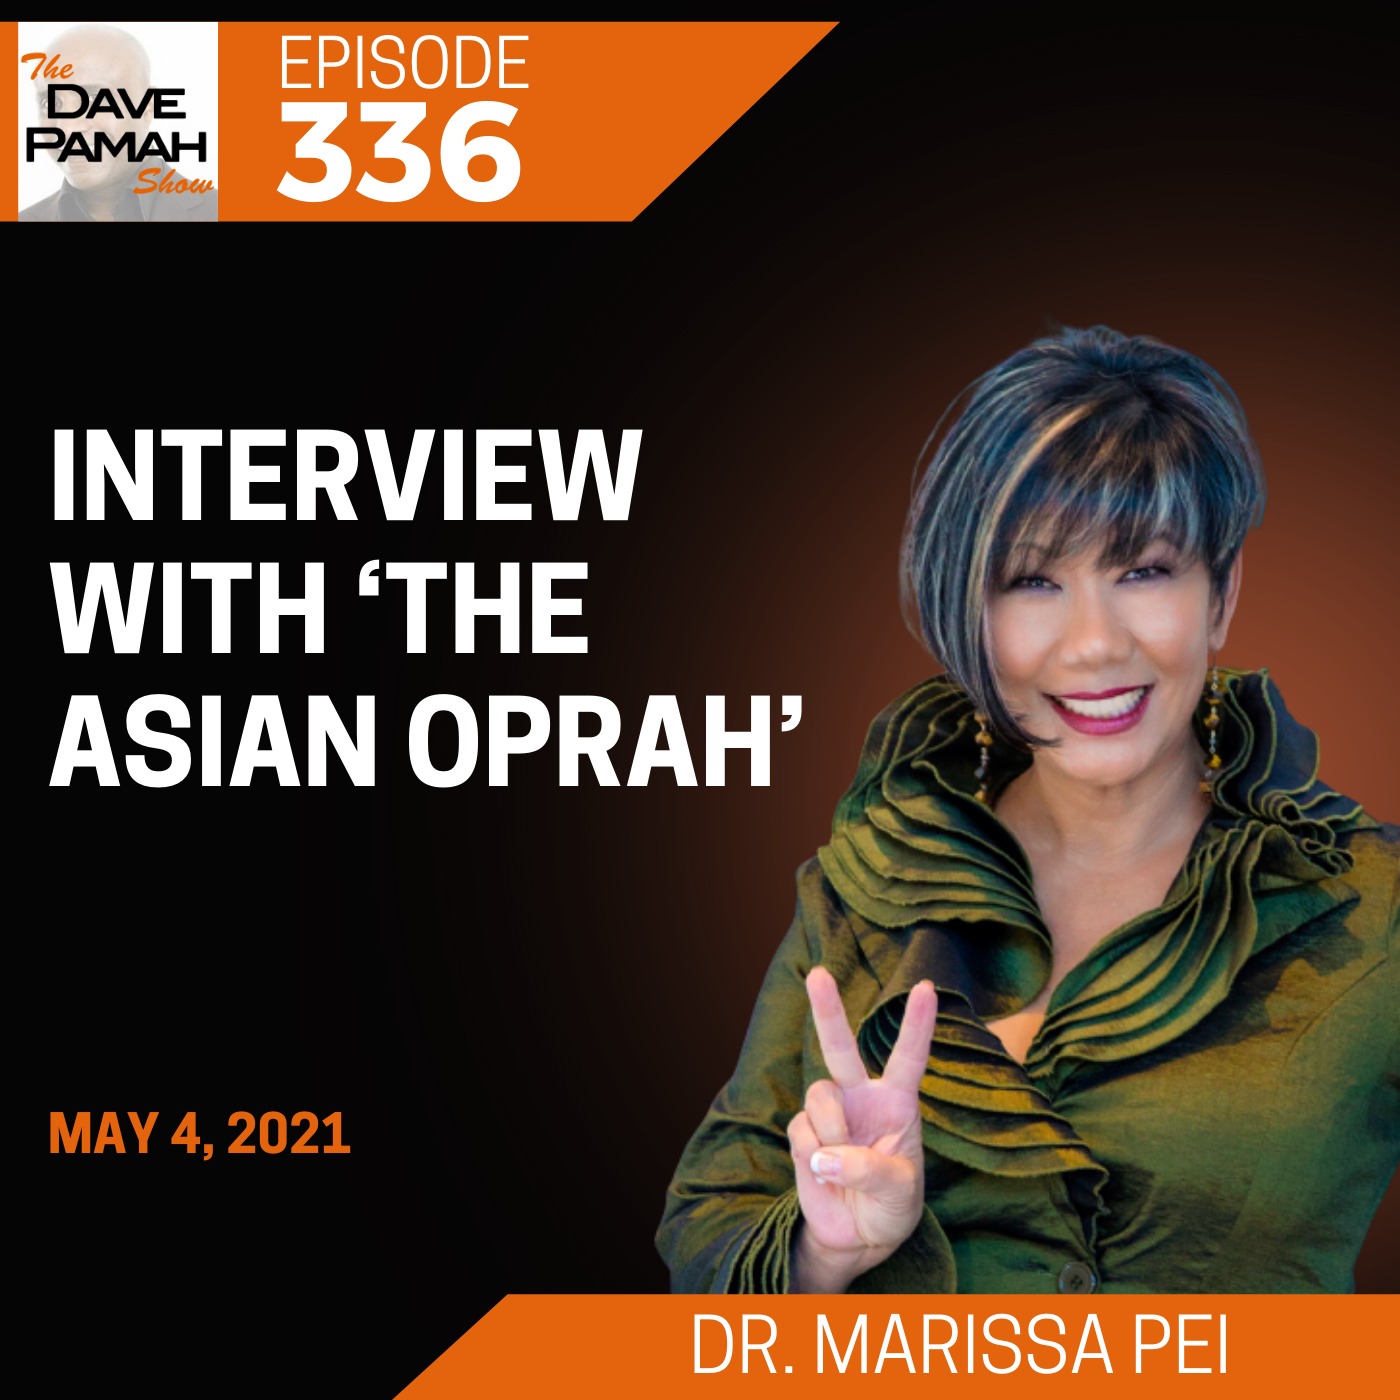 Interview with Dr. Marissa Pei aka ‘The Asian Oprah’ Image